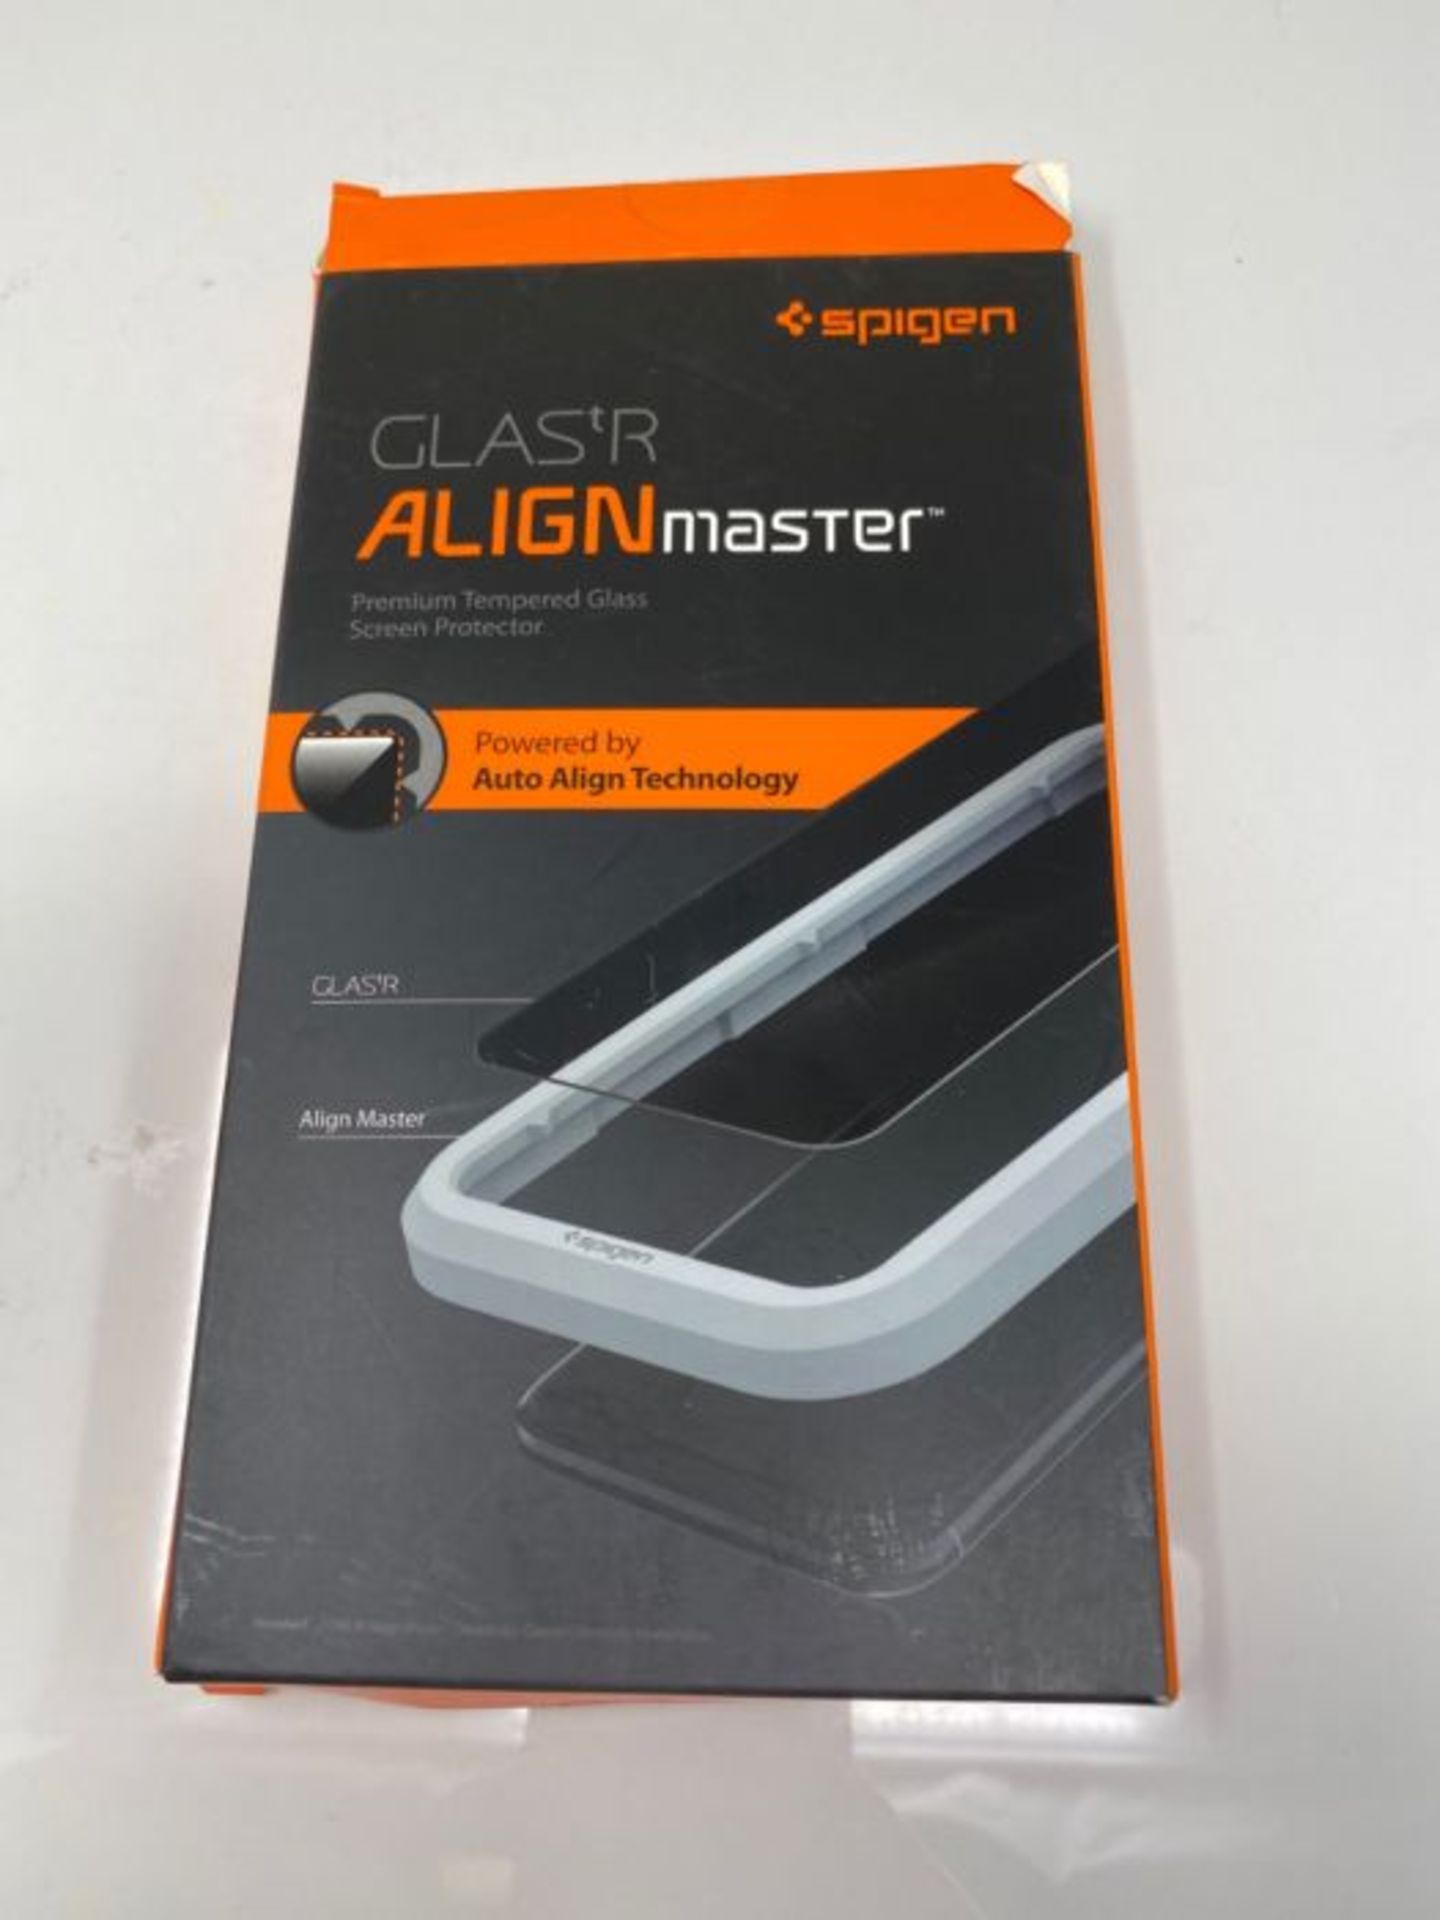 Spigen, 1 Pack, Screen Protector for iPhone SE 2020, AlignMaster, Full Screen Coverage - Image 2 of 3